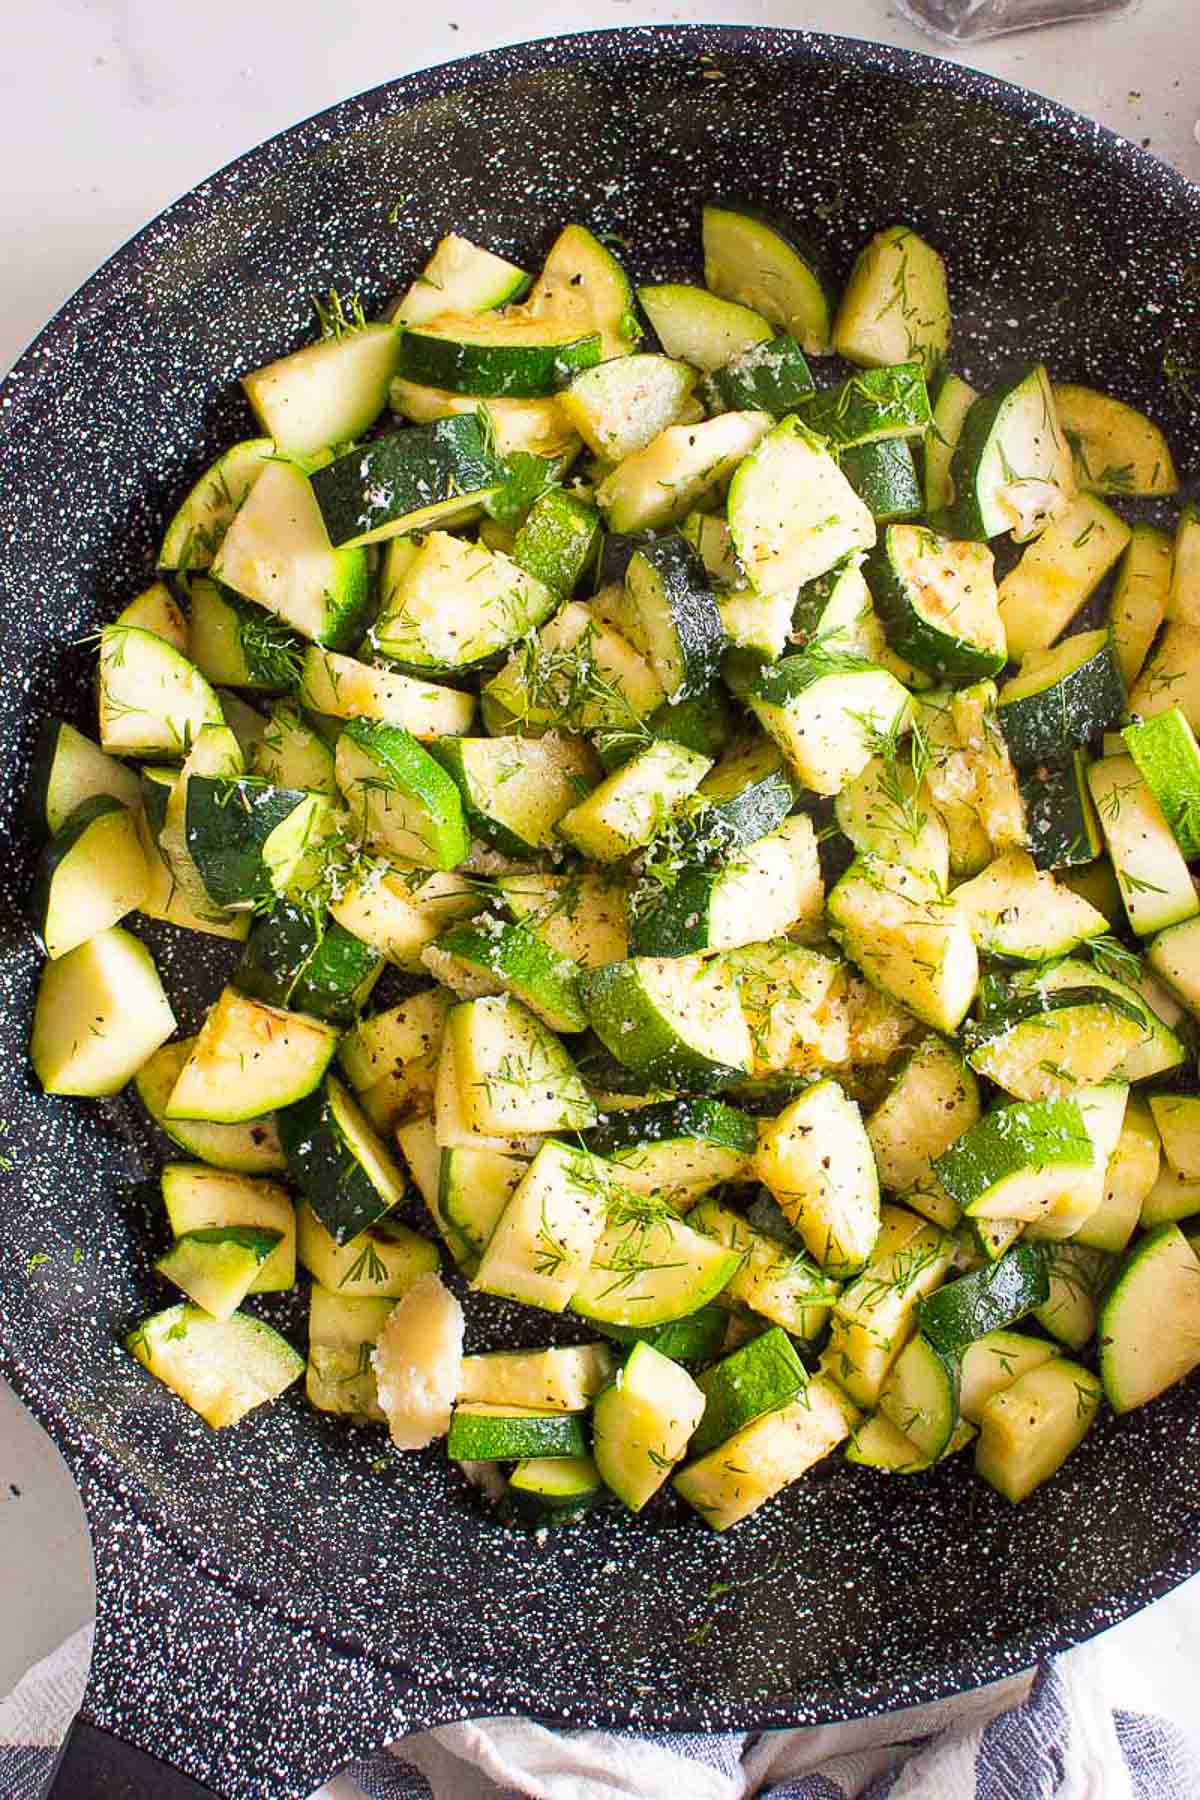 Sauteed zucchini in a skillet garnished with dill and Parmesan.